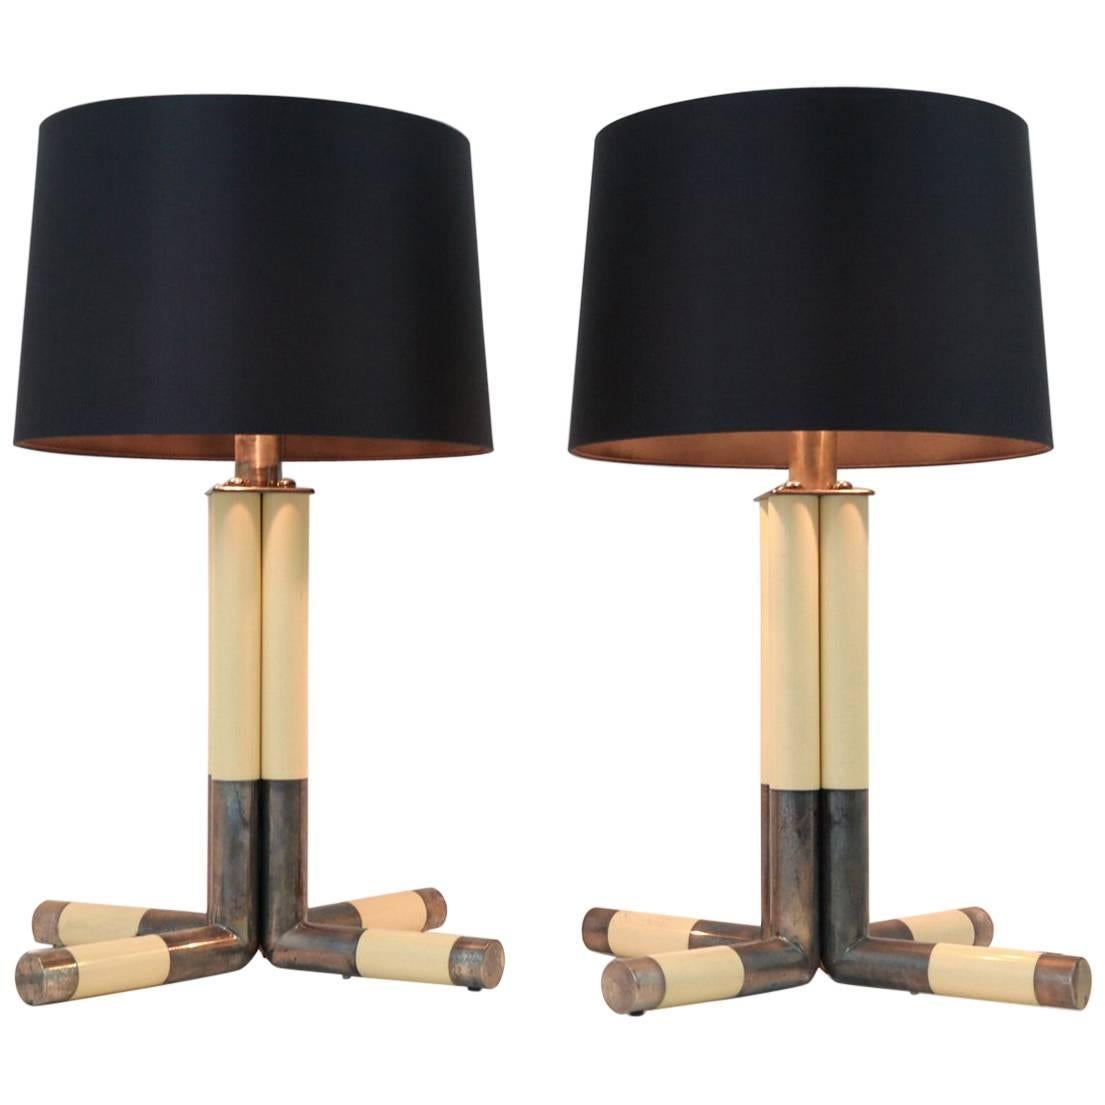 Silver and Avoriolina Lamps by Banci